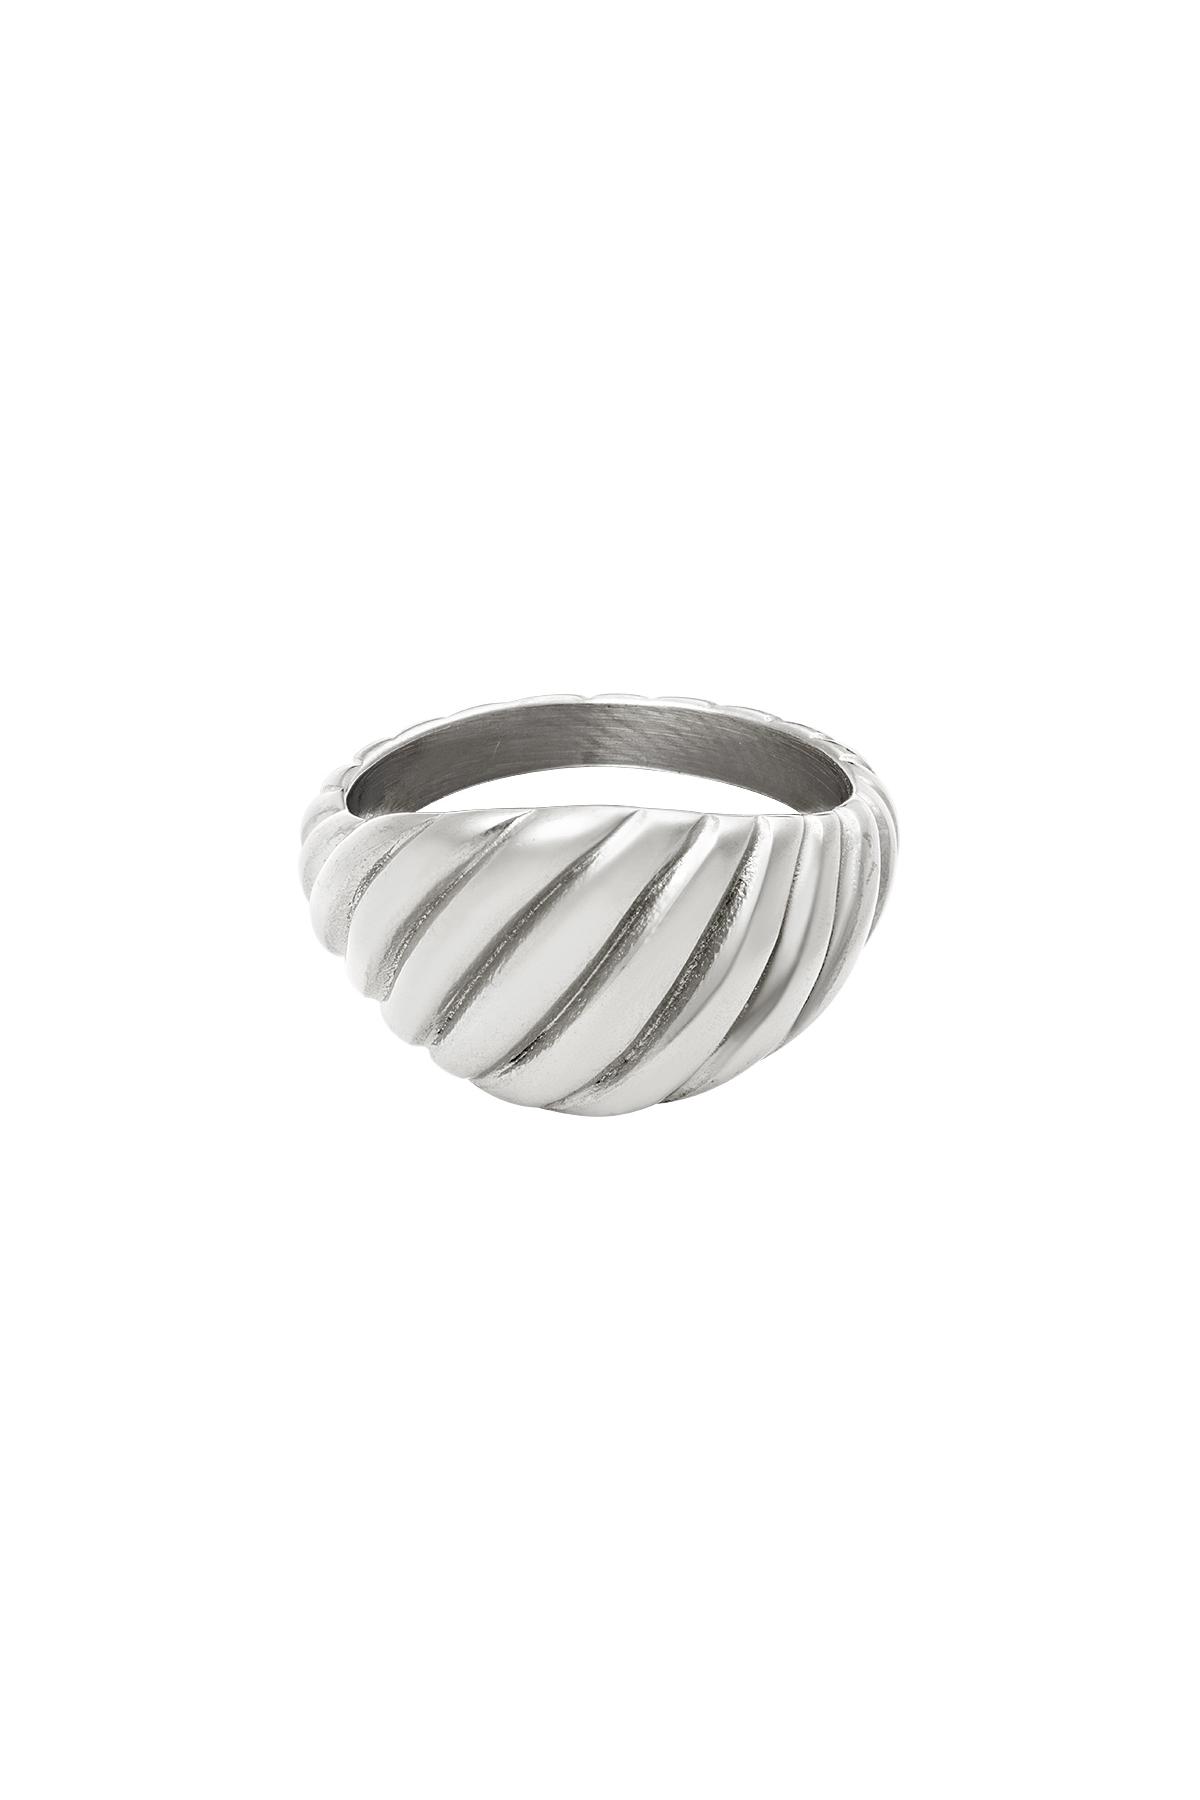 Baquette ring Zilver Stainless Steel 17 h5 